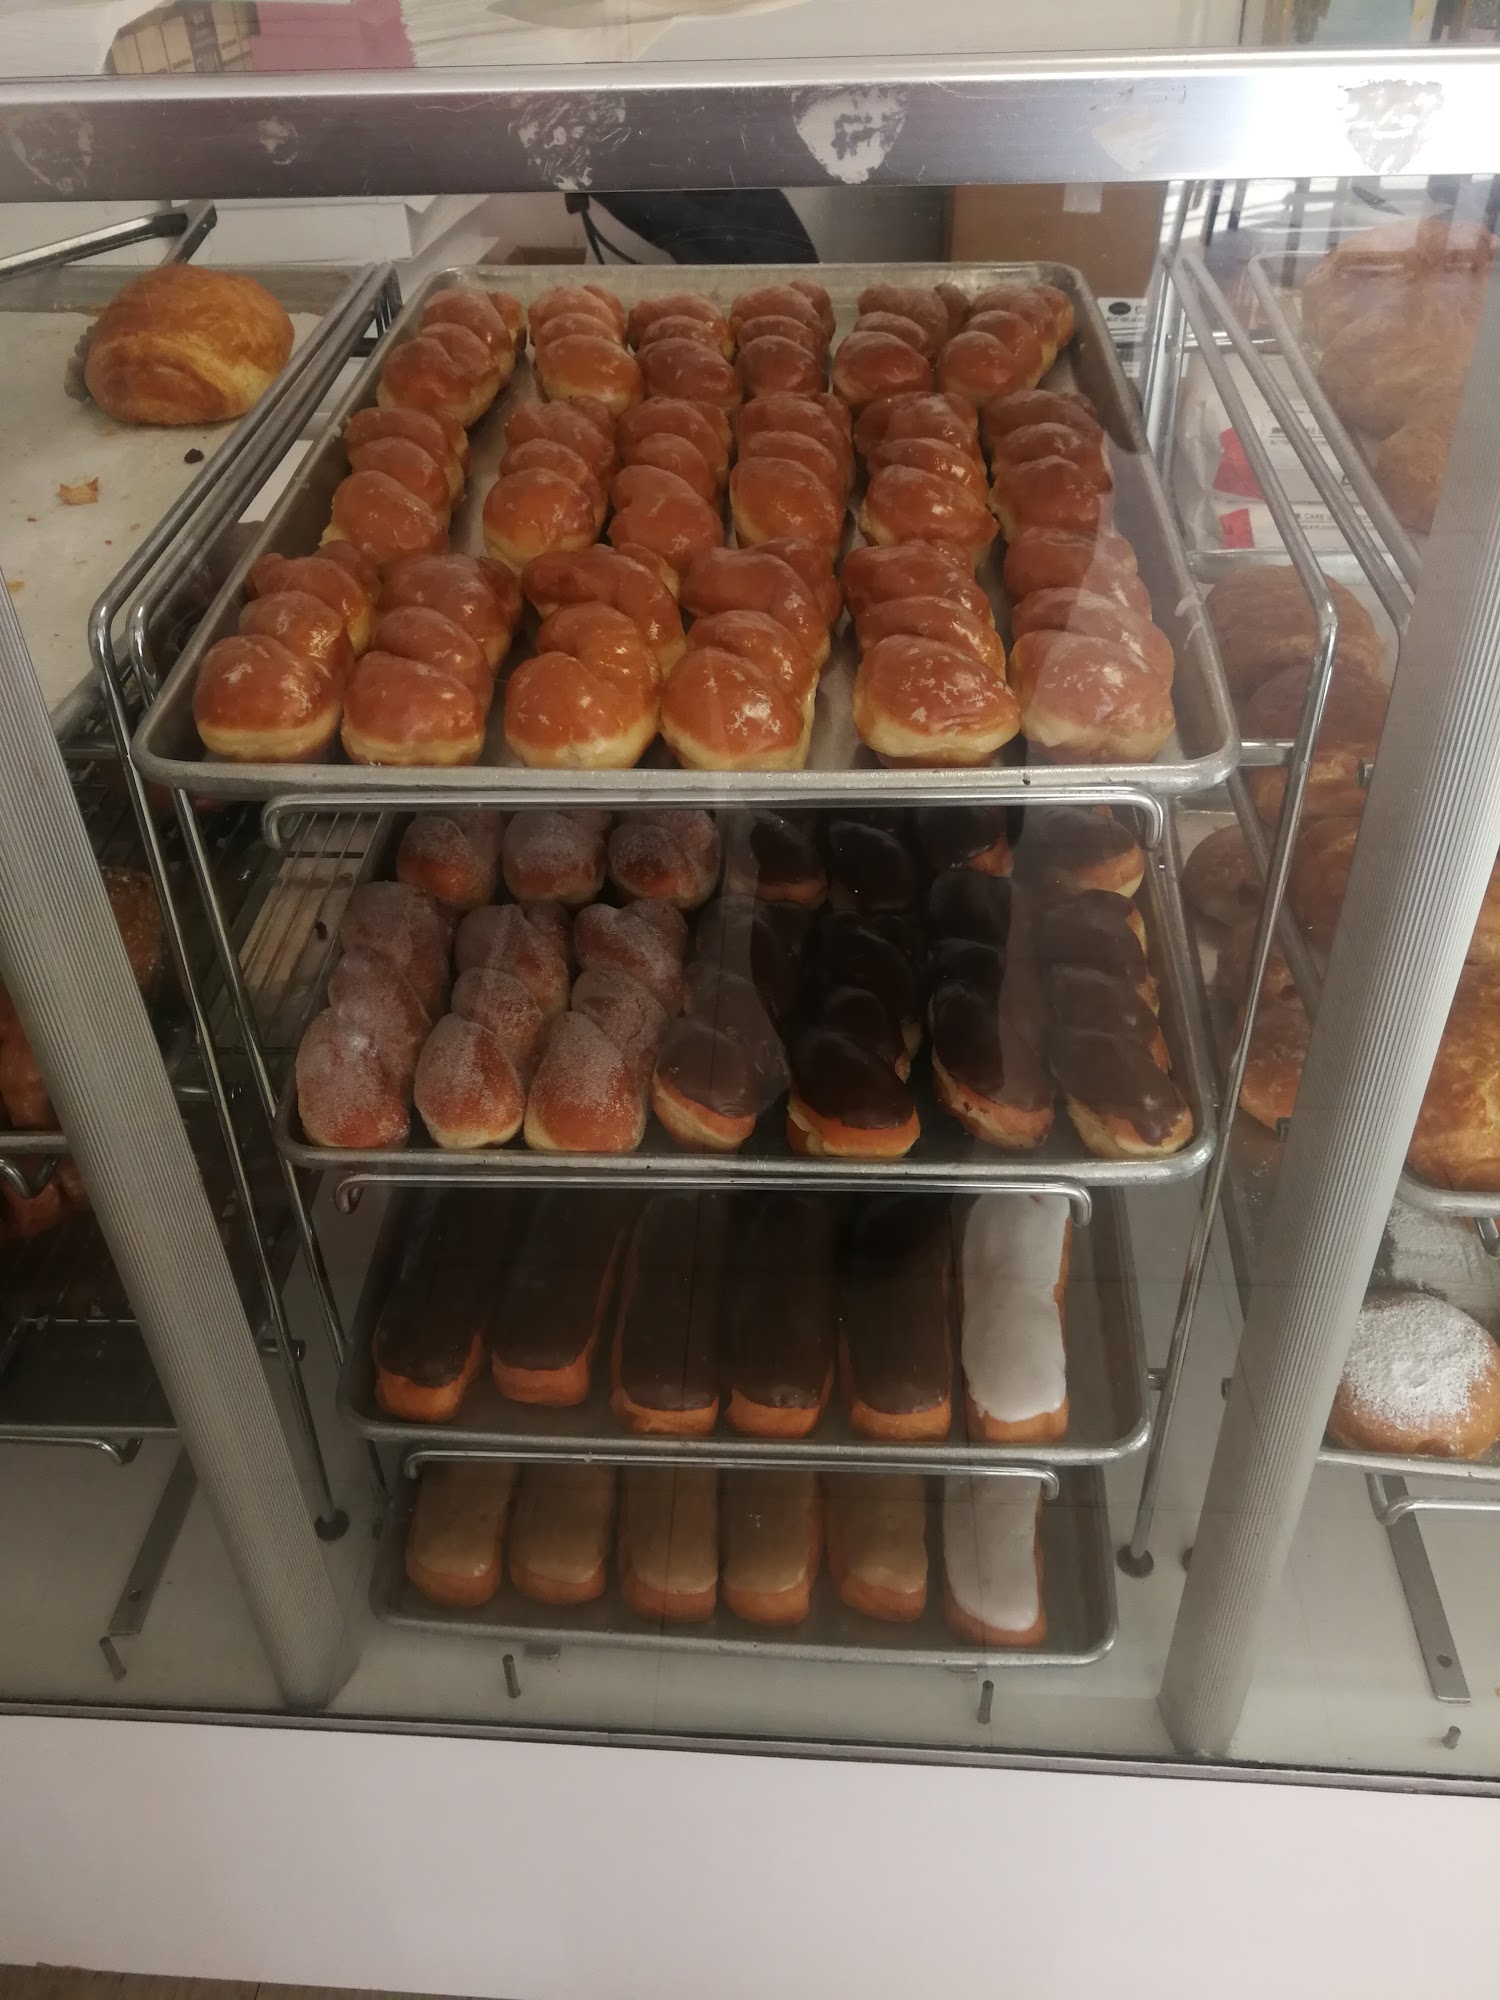 Daily Donuts